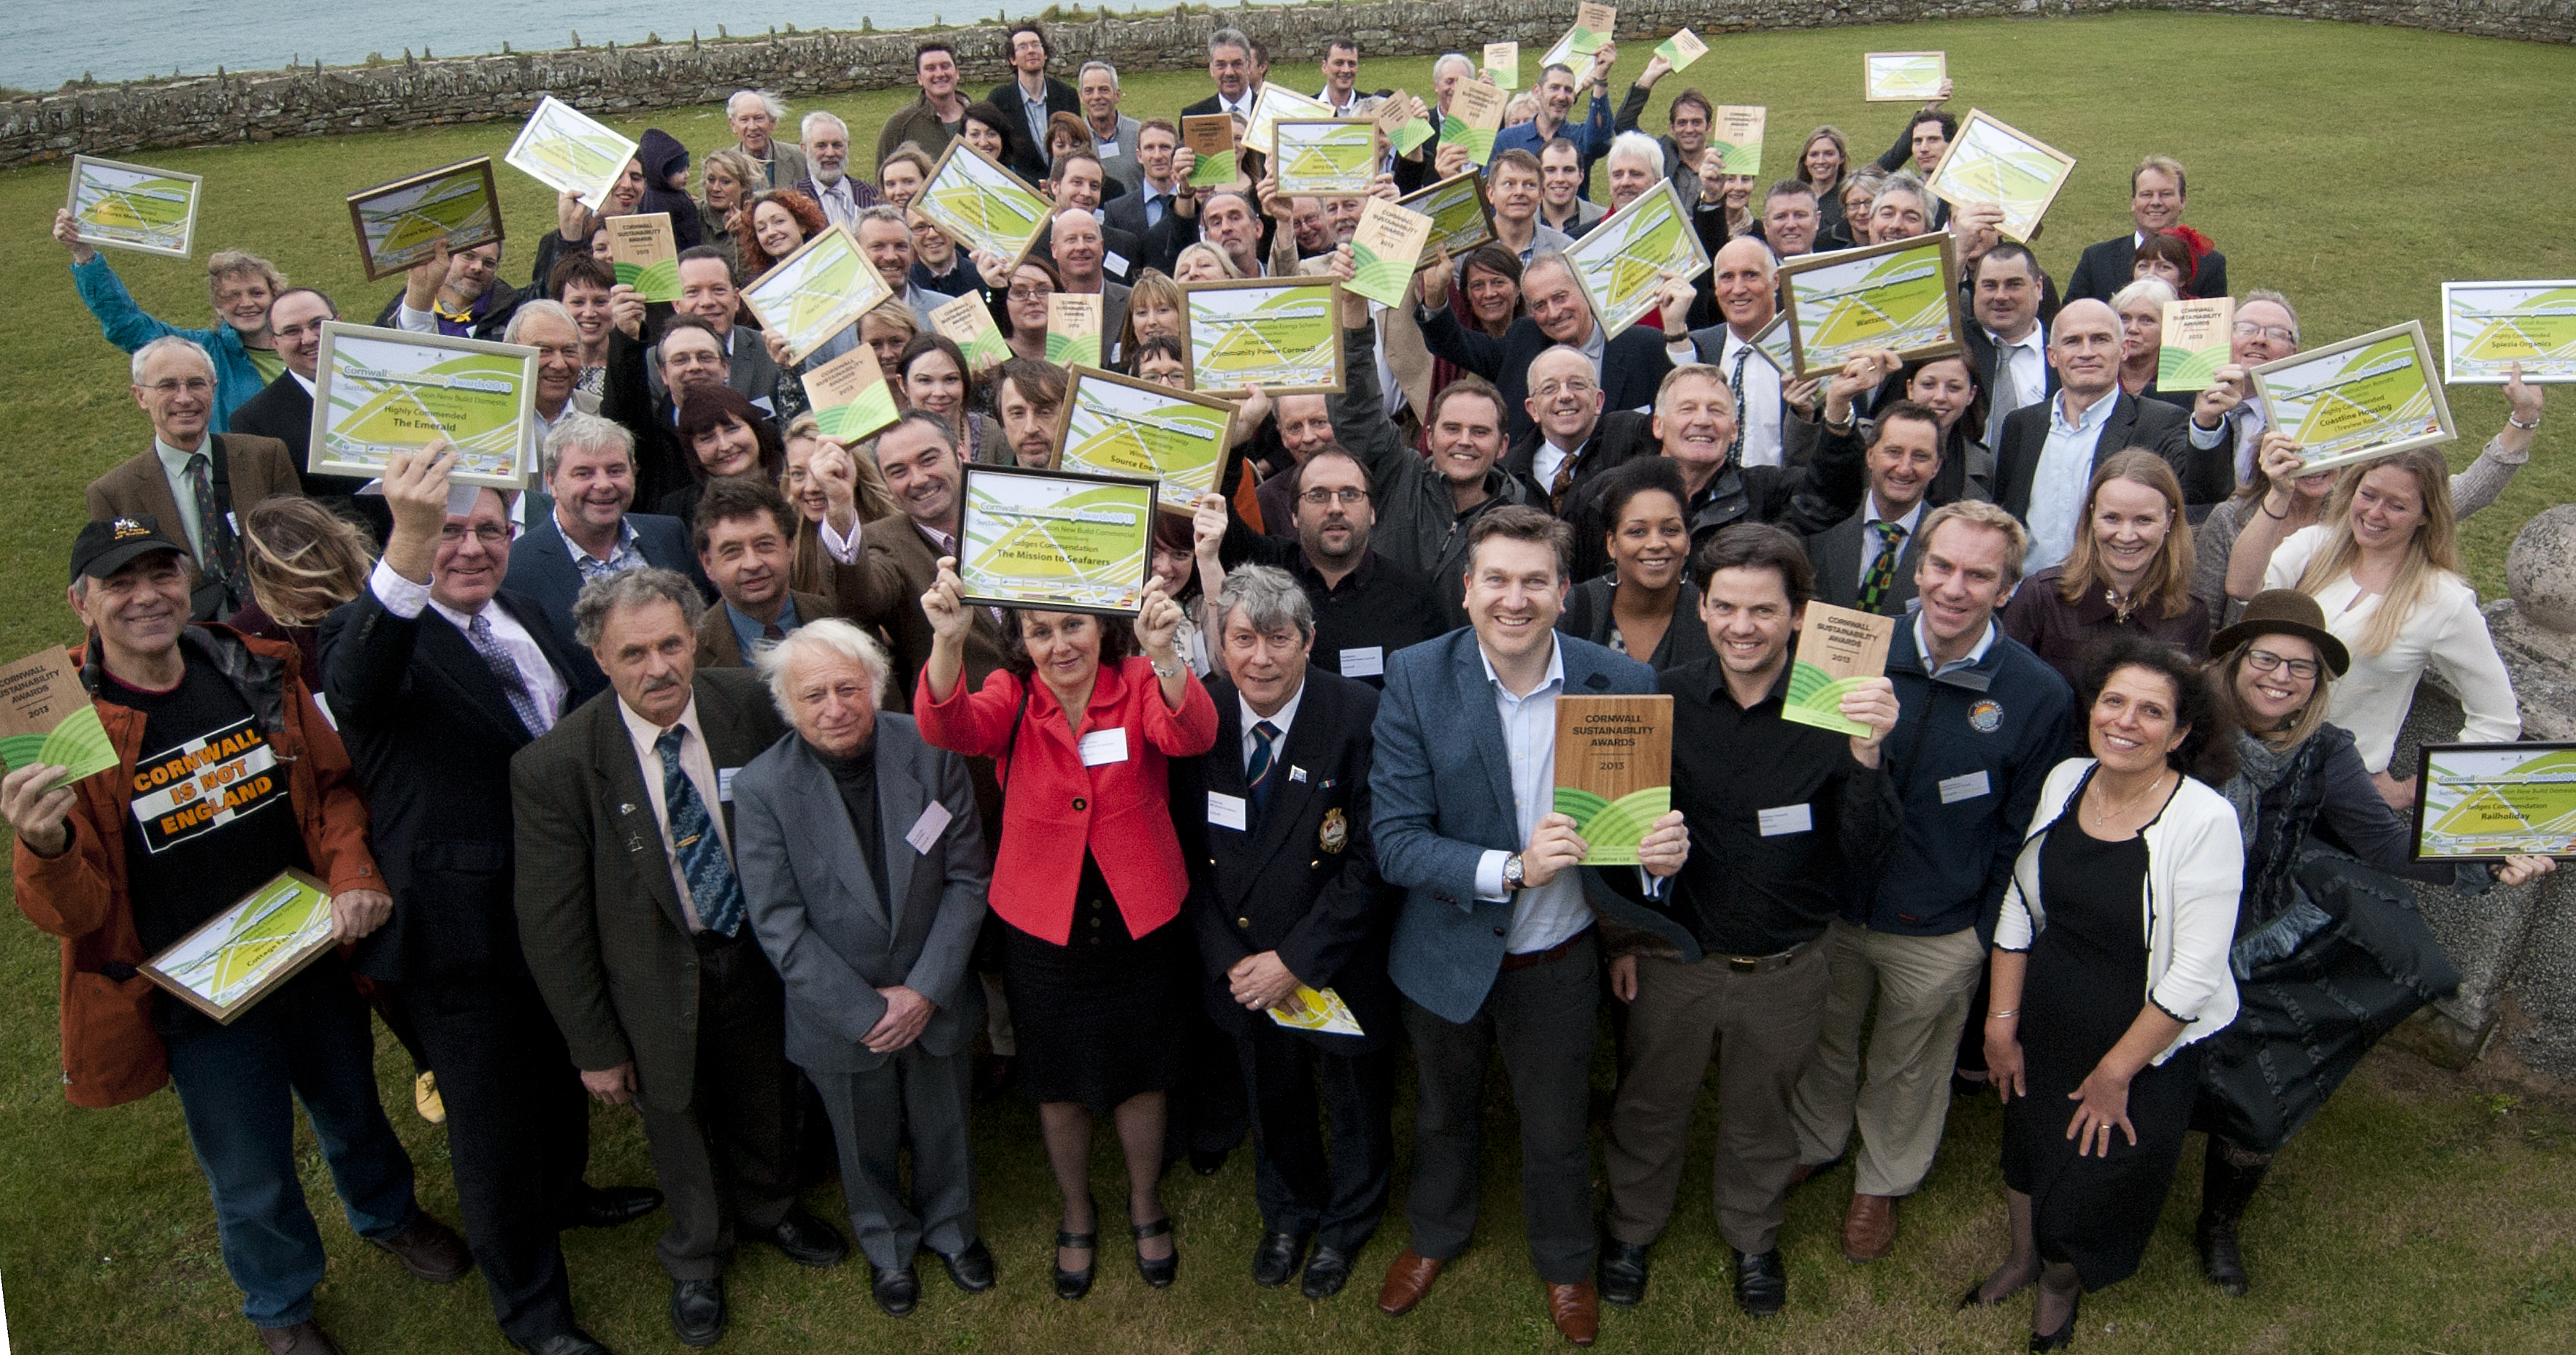 Winners at the 2013 Cornwall Sustainability Awards. Organisers have just announced this year's shortlist.